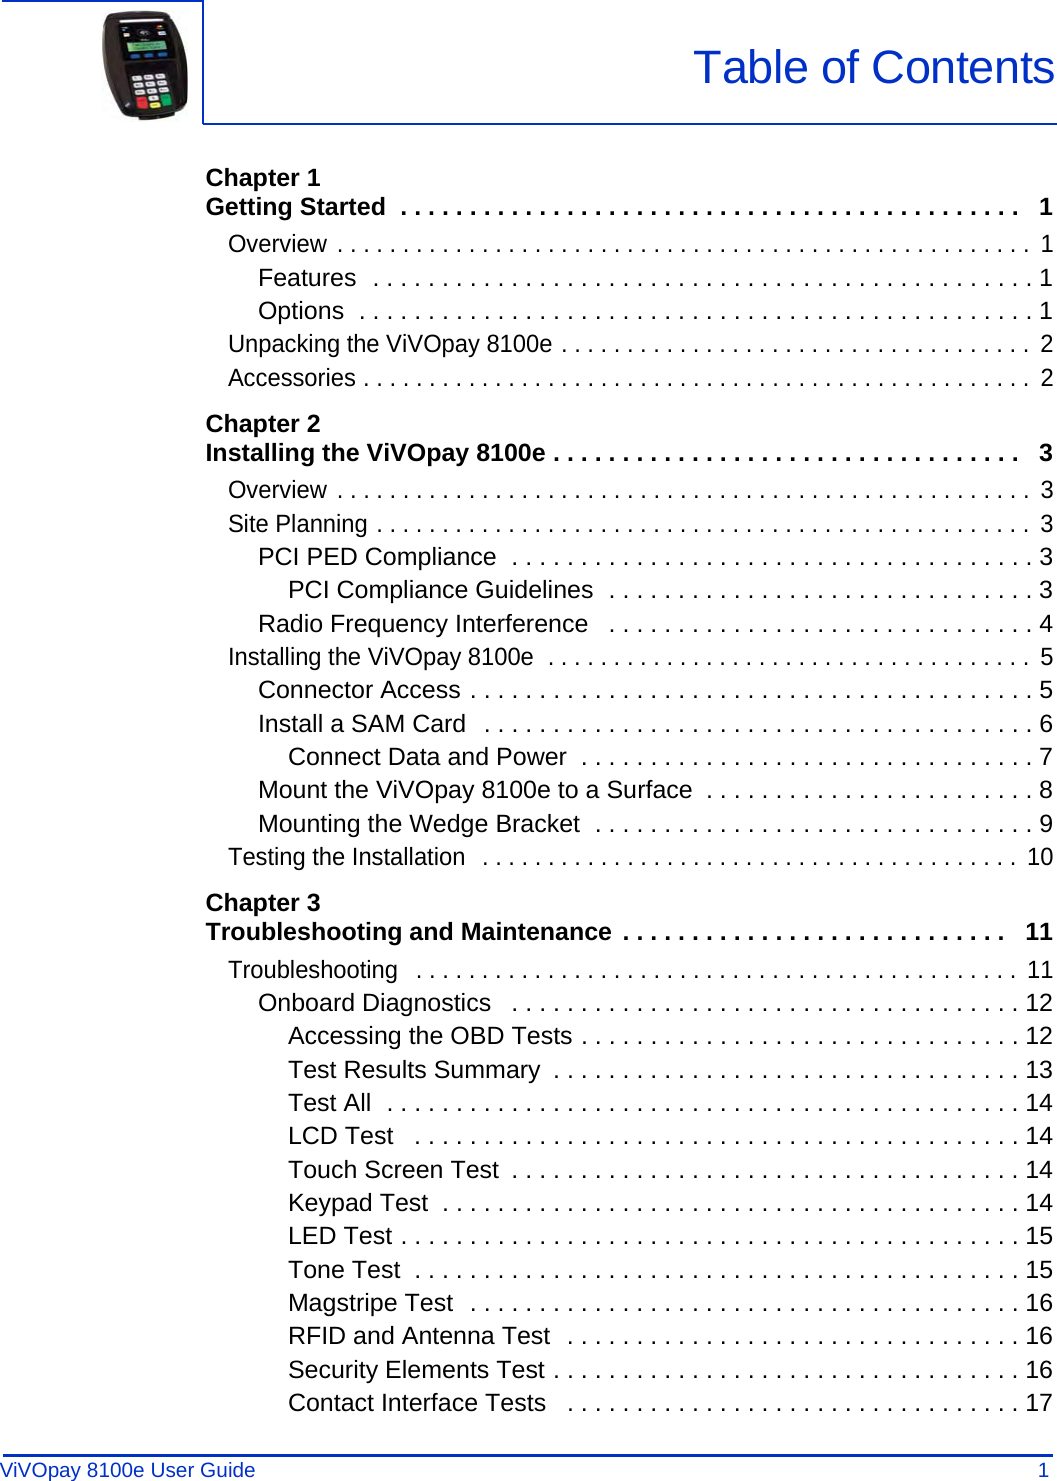 ViVOpay 8100e User Guide 1               Chapter 1Getting Started  . . . . . . . . . . . . . . . . . . . . . . . . . . . . . . . . . . . . . . . . . . . . .   1Overview . . . . . . . . . . . . . . . . . . . . . . . . . . . . . . . . . . . . . . . . . . . . . . . . . . . . .  1Features  . . . . . . . . . . . . . . . . . . . . . . . . . . . . . . . . . . . . . . . . . . . . . . . . 1Options  . . . . . . . . . . . . . . . . . . . . . . . . . . . . . . . . . . . . . . . . . . . . . . . . . 1Unpacking the ViVOpay 8100e . . . . . . . . . . . . . . . . . . . . . . . . . . . . . . . . . . . .  2Accessories . . . . . . . . . . . . . . . . . . . . . . . . . . . . . . . . . . . . . . . . . . . . . . . . . . .  2Chapter 2Installing the ViVOpay 8100e . . . . . . . . . . . . . . . . . . . . . . . . . . . . . . . . . .   3Overview . . . . . . . . . . . . . . . . . . . . . . . . . . . . . . . . . . . . . . . . . . . . . . . . . . . . .  3Site Planning . . . . . . . . . . . . . . . . . . . . . . . . . . . . . . . . . . . . . . . . . . . . . . . . . .  3PCI PED Compliance  . . . . . . . . . . . . . . . . . . . . . . . . . . . . . . . . . . . . . . 3PCI Compliance Guidelines  . . . . . . . . . . . . . . . . . . . . . . . . . . . . . . . 3Radio Frequency Interference   . . . . . . . . . . . . . . . . . . . . . . . . . . . . . . . 4Installing the ViVOpay 8100e  . . . . . . . . . . . . . . . . . . . . . . . . . . . . . . . . . . . . .  5Connector Access . . . . . . . . . . . . . . . . . . . . . . . . . . . . . . . . . . . . . . . . . 5Install a SAM Card  . . . . . . . . . . . . . . . . . . . . . . . . . . . . . . . . . . . . . . . . 6Connect Data and Power  . . . . . . . . . . . . . . . . . . . . . . . . . . . . . . . . . 7Mount the ViVOpay 8100e to a Surface  . . . . . . . . . . . . . . . . . . . . . . . . 8Mounting the Wedge Bracket  . . . . . . . . . . . . . . . . . . . . . . . . . . . . . . . . 9Testing the Installation  . . . . . . . . . . . . . . . . . . . . . . . . . . . . . . . . . . . . . . . . .  10Chapter 3Troubleshooting and Maintenance . . . . . . . . . . . . . . . . . . . . . . . . . . . .   11Troubleshooting   . . . . . . . . . . . . . . . . . . . . . . . . . . . . . . . . . . . . . . . . . . . . . .  11Onboard Diagnostics   . . . . . . . . . . . . . . . . . . . . . . . . . . . . . . . . . . . . . 12Accessing the OBD Tests . . . . . . . . . . . . . . . . . . . . . . . . . . . . . . . . 12Test Results Summary  . . . . . . . . . . . . . . . . . . . . . . . . . . . . . . . . . . 13Test All  . . . . . . . . . . . . . . . . . . . . . . . . . . . . . . . . . . . . . . . . . . . . . . 14LCD Test   . . . . . . . . . . . . . . . . . . . . . . . . . . . . . . . . . . . . . . . . . . . . 14Touch Screen Test  . . . . . . . . . . . . . . . . . . . . . . . . . . . . . . . . . . . . . 14Keypad Test  . . . . . . . . . . . . . . . . . . . . . . . . . . . . . . . . . . . . . . . . . . 14LED Test . . . . . . . . . . . . . . . . . . . . . . . . . . . . . . . . . . . . . . . . . . . . . 15Tone Test  . . . . . . . . . . . . . . . . . . . . . . . . . . . . . . . . . . . . . . . . . . . . 15Magstripe Test  . . . . . . . . . . . . . . . . . . . . . . . . . . . . . . . . . . . . . . . . 16RFID and Antenna Test  . . . . . . . . . . . . . . . . . . . . . . . . . . . . . . . . . 16Security Elements Test . . . . . . . . . . . . . . . . . . . . . . . . . . . . . . . . . . 16Contact Interface Tests   . . . . . . . . . . . . . . . . . . . . . . . . . . . . . . . . . 17Table of Contents